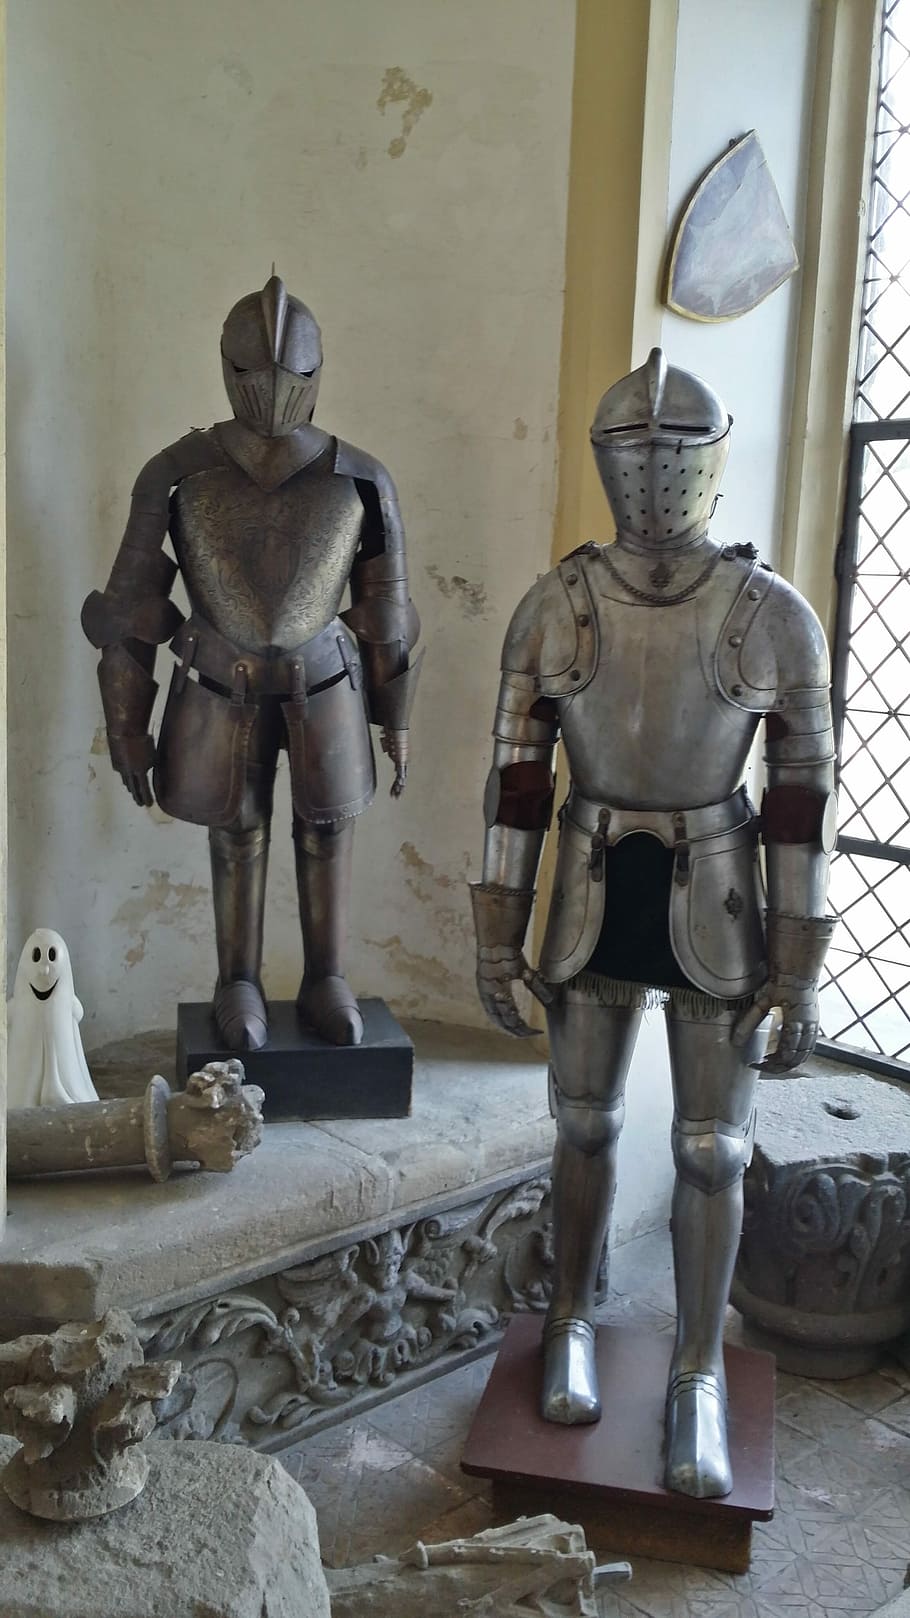 Armor, Castle, ritterruestung, rhine stone, middle ages, sachsen, historically, knight, old, history